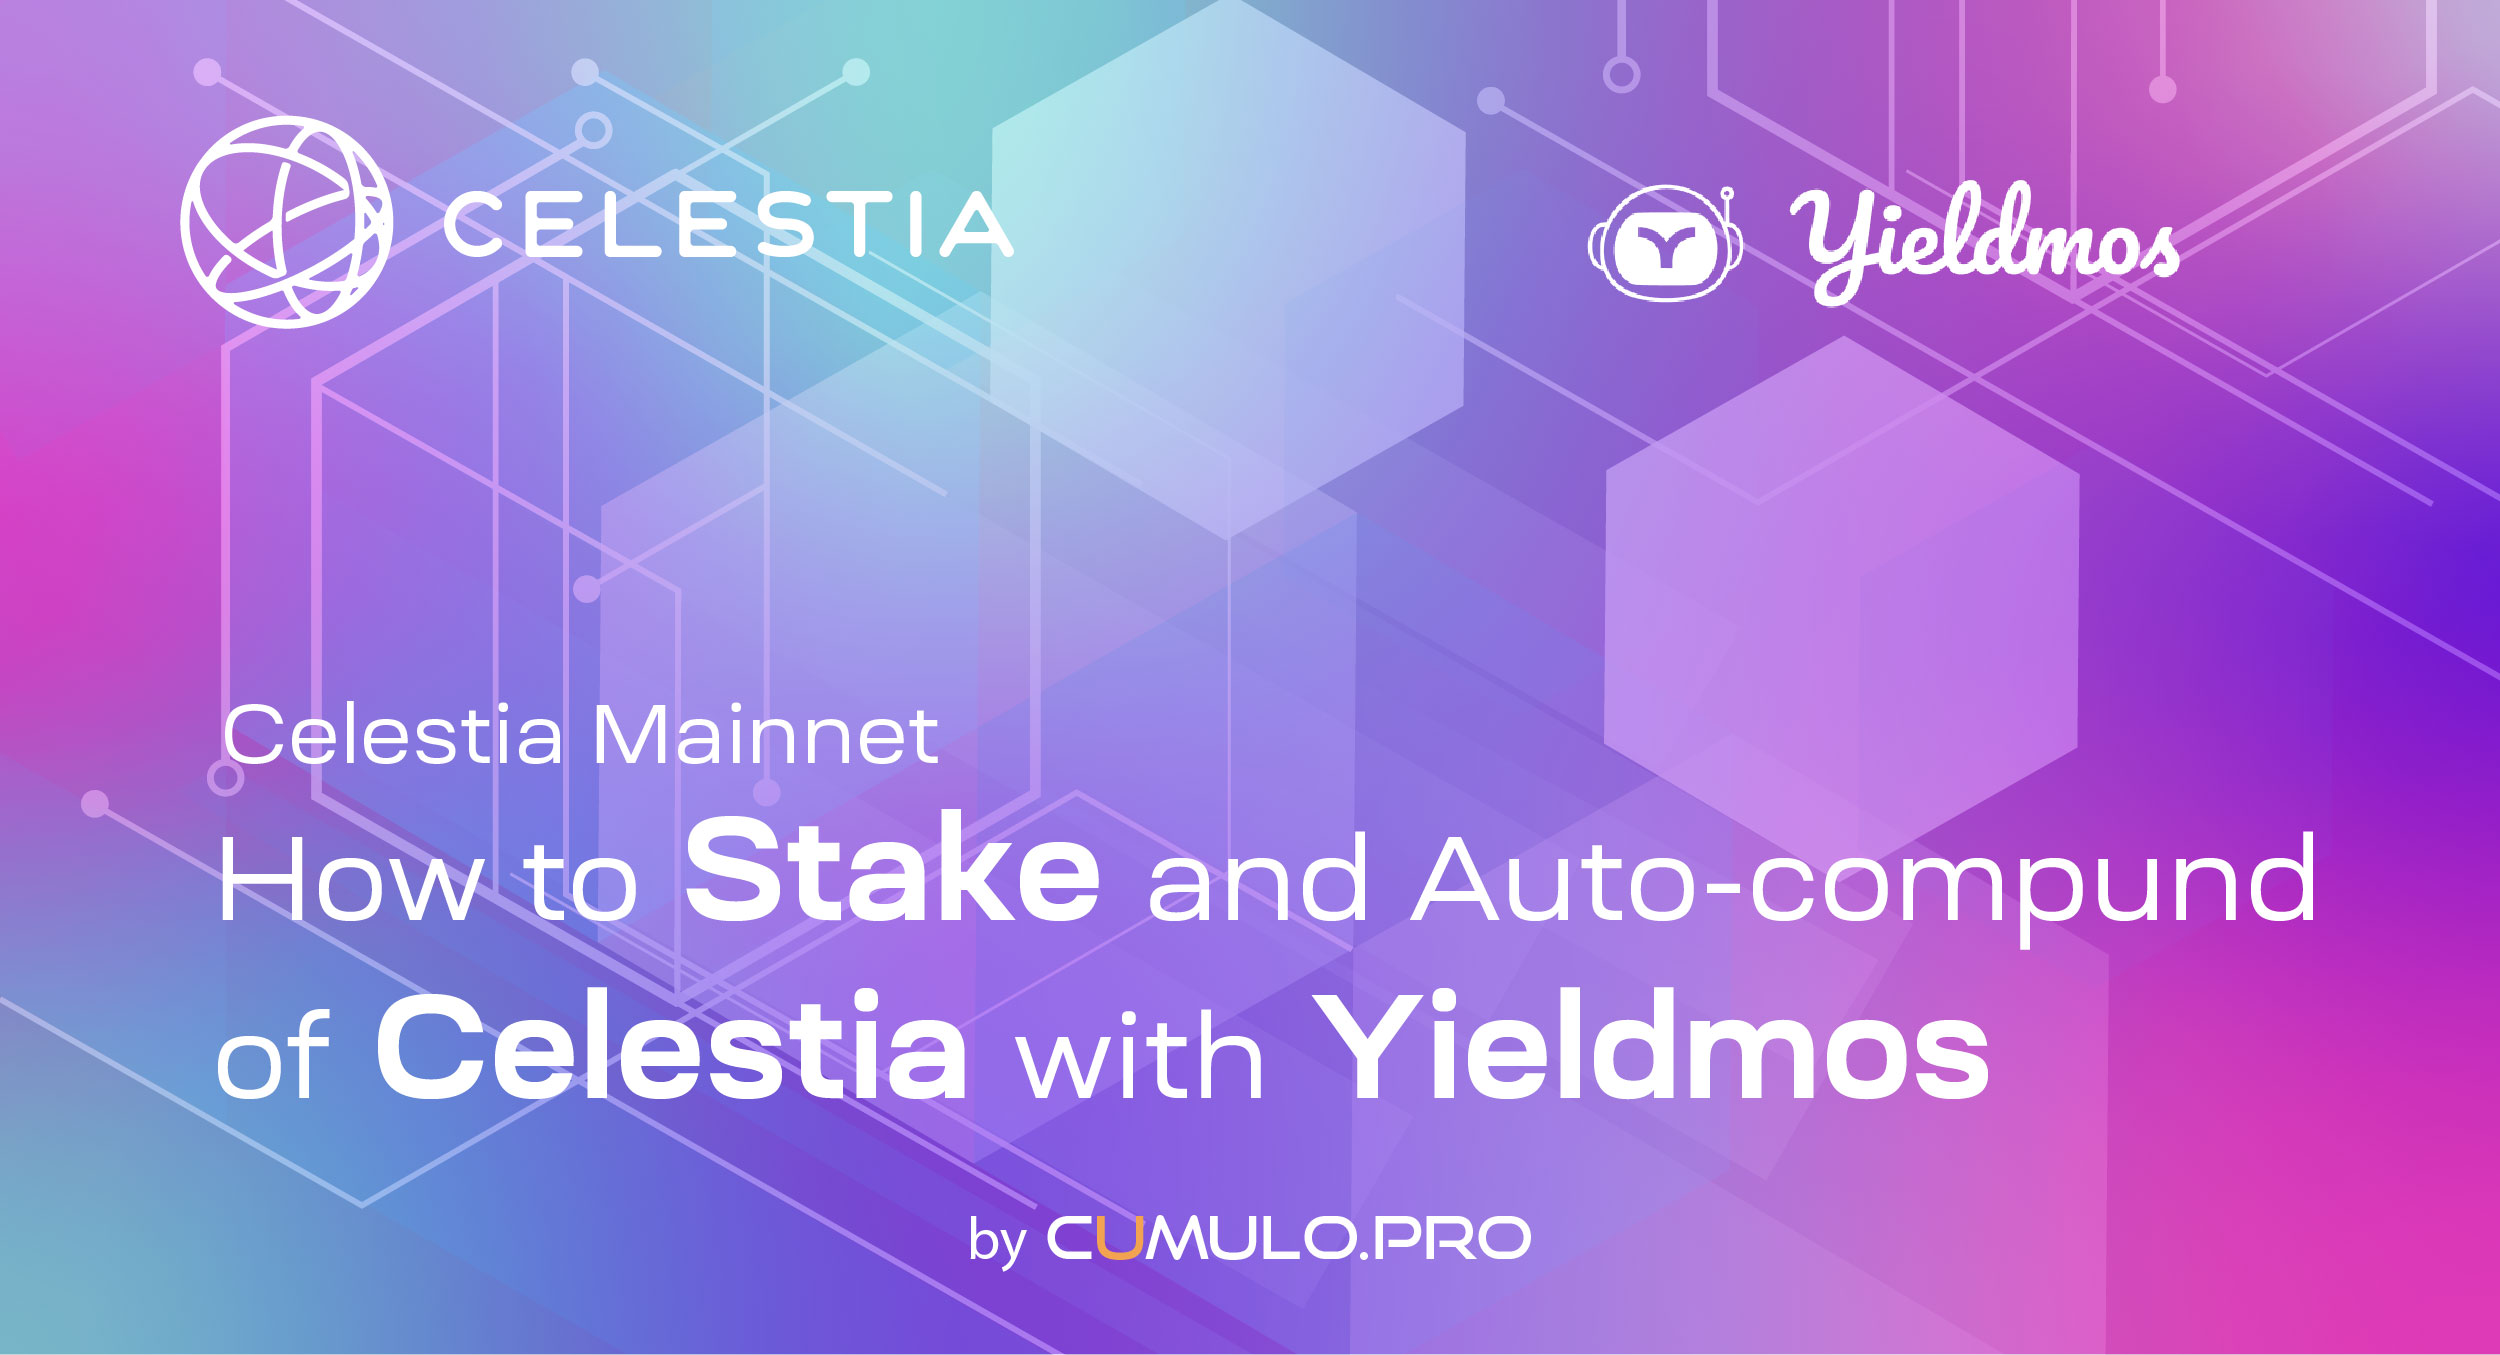 How to Auto-compound of Celestia with Yieldmos